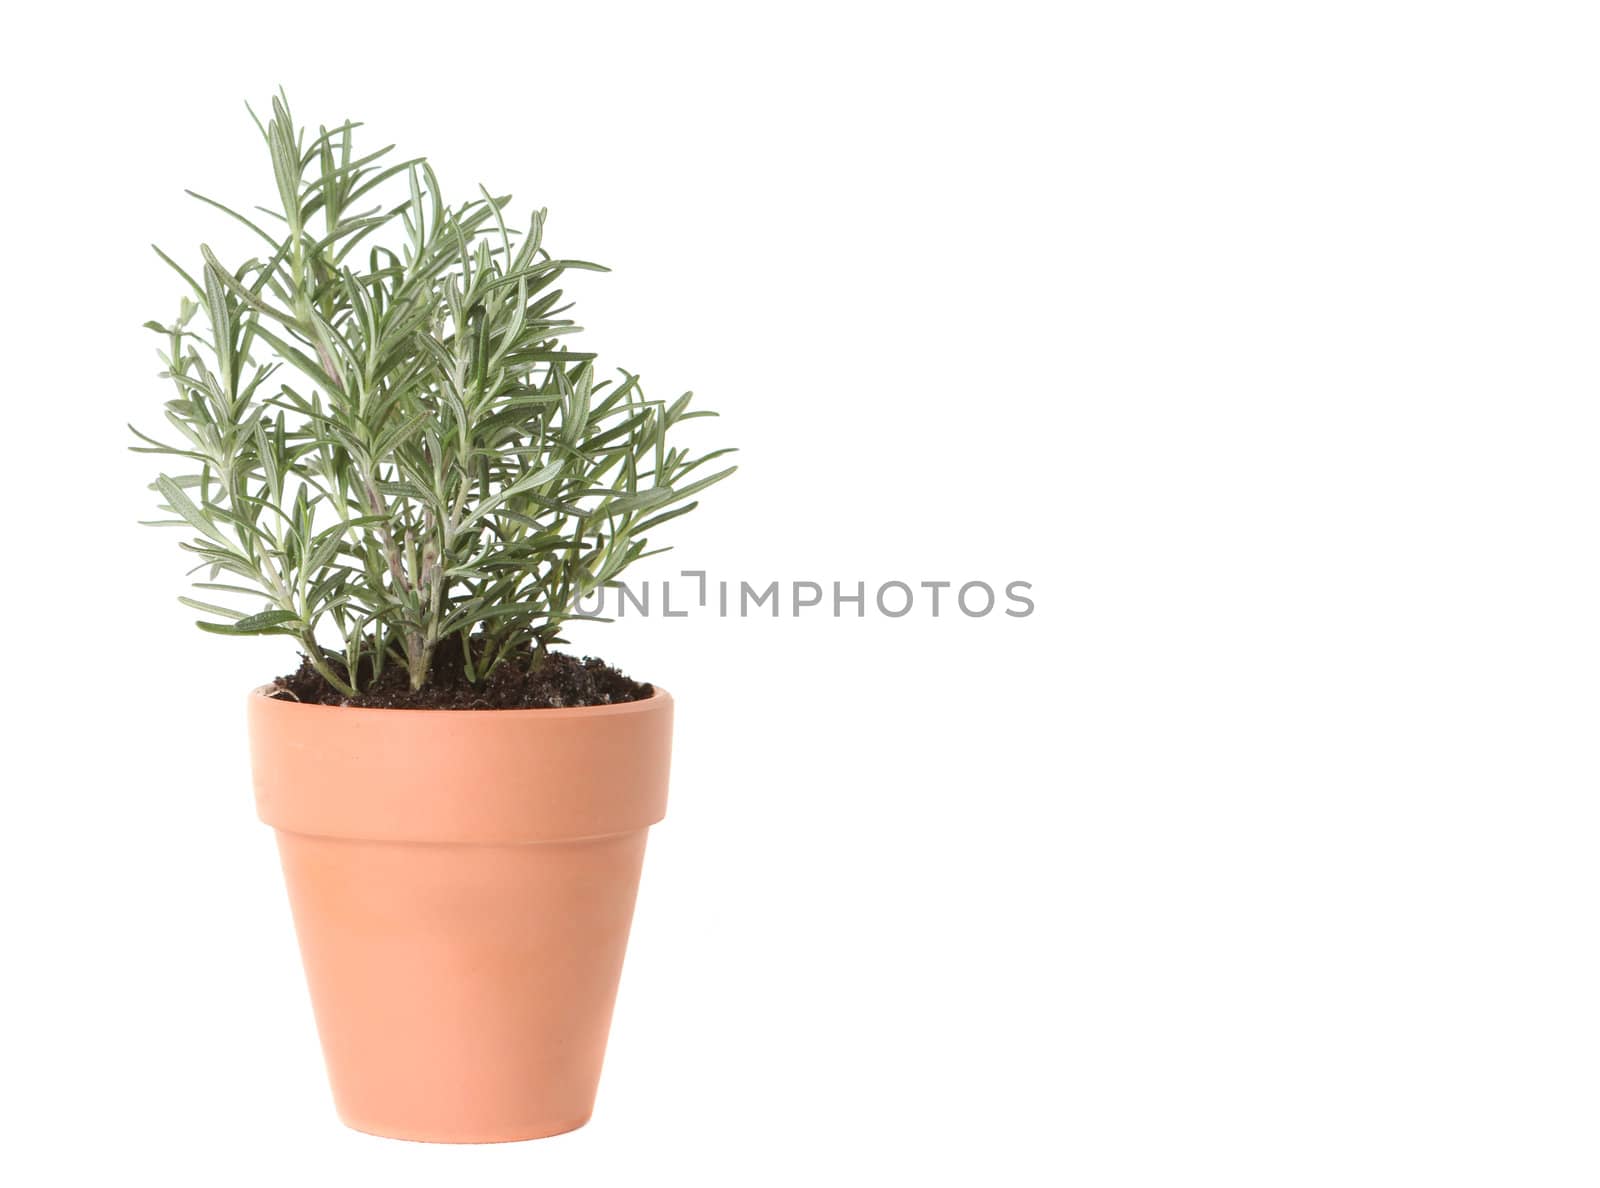 Rosemary Herb Planted in a Clay Pot on White Background With Copy Space for Text